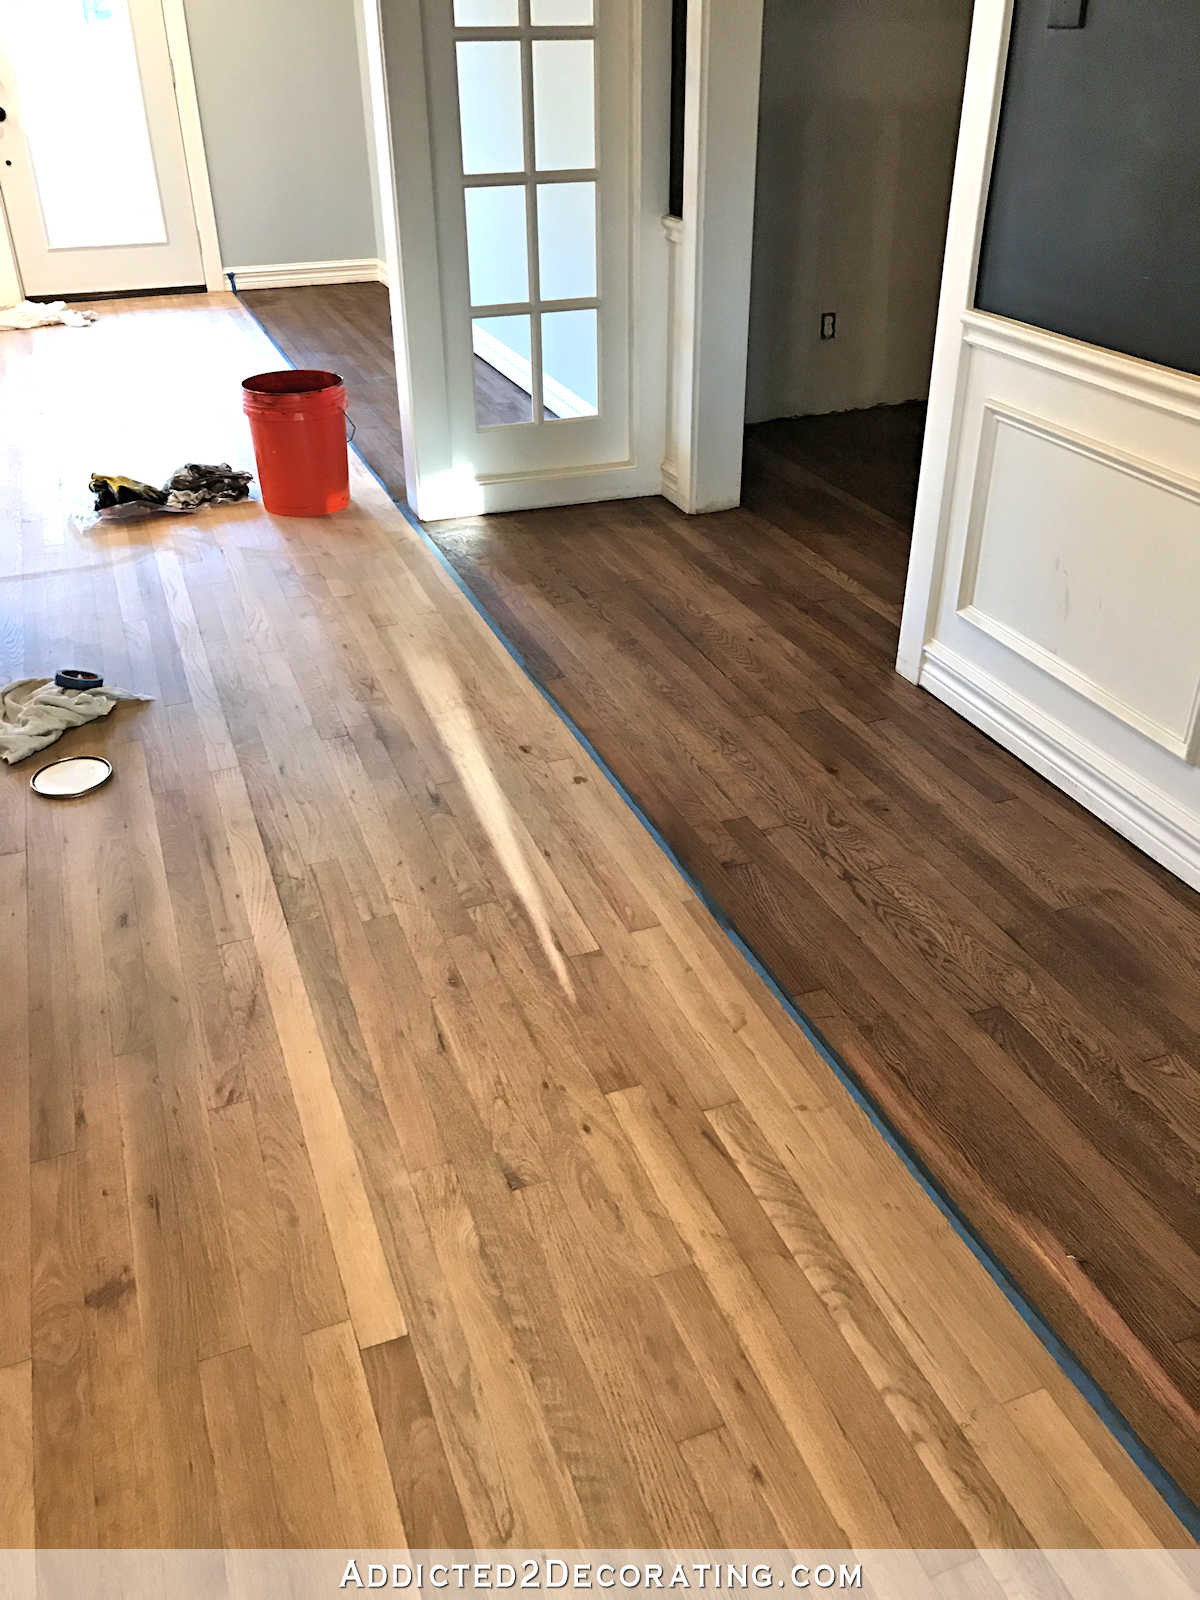 22 Stunning How to Finish An Unfinished Hardwood Floor 2024 free download how to finish an unfinished hardwood floor of adventures in staining my red oak hardwood floors products process regarding staining red oak hardwood floors 6 stain on partial floor in entryw